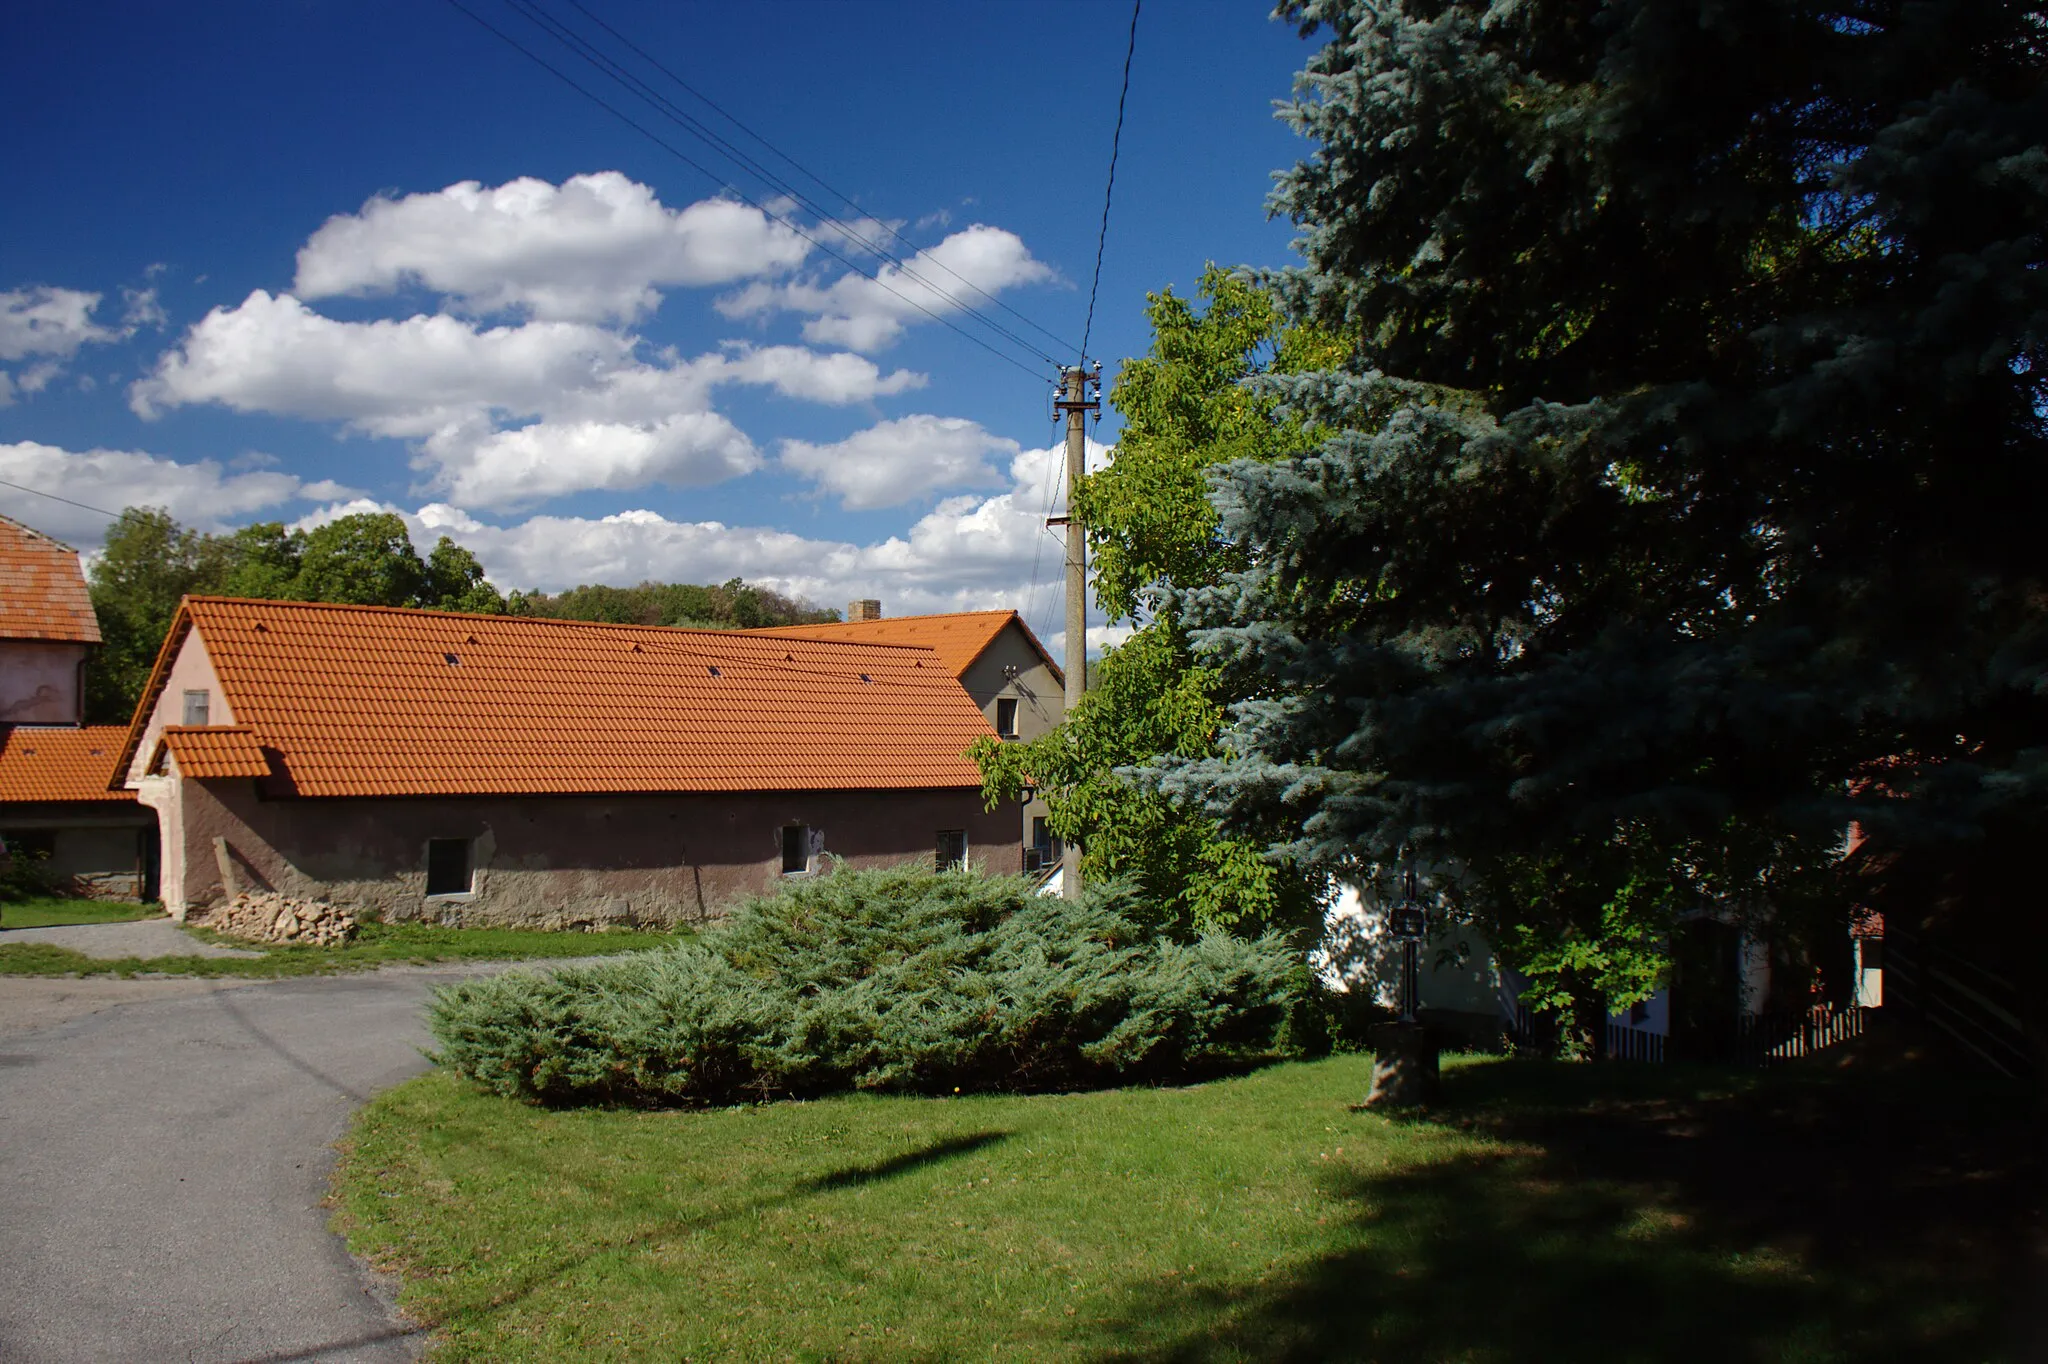 Photo showing: A building in the central part of the village of Kobylí in Benešov District, Central Bohemia, CZ